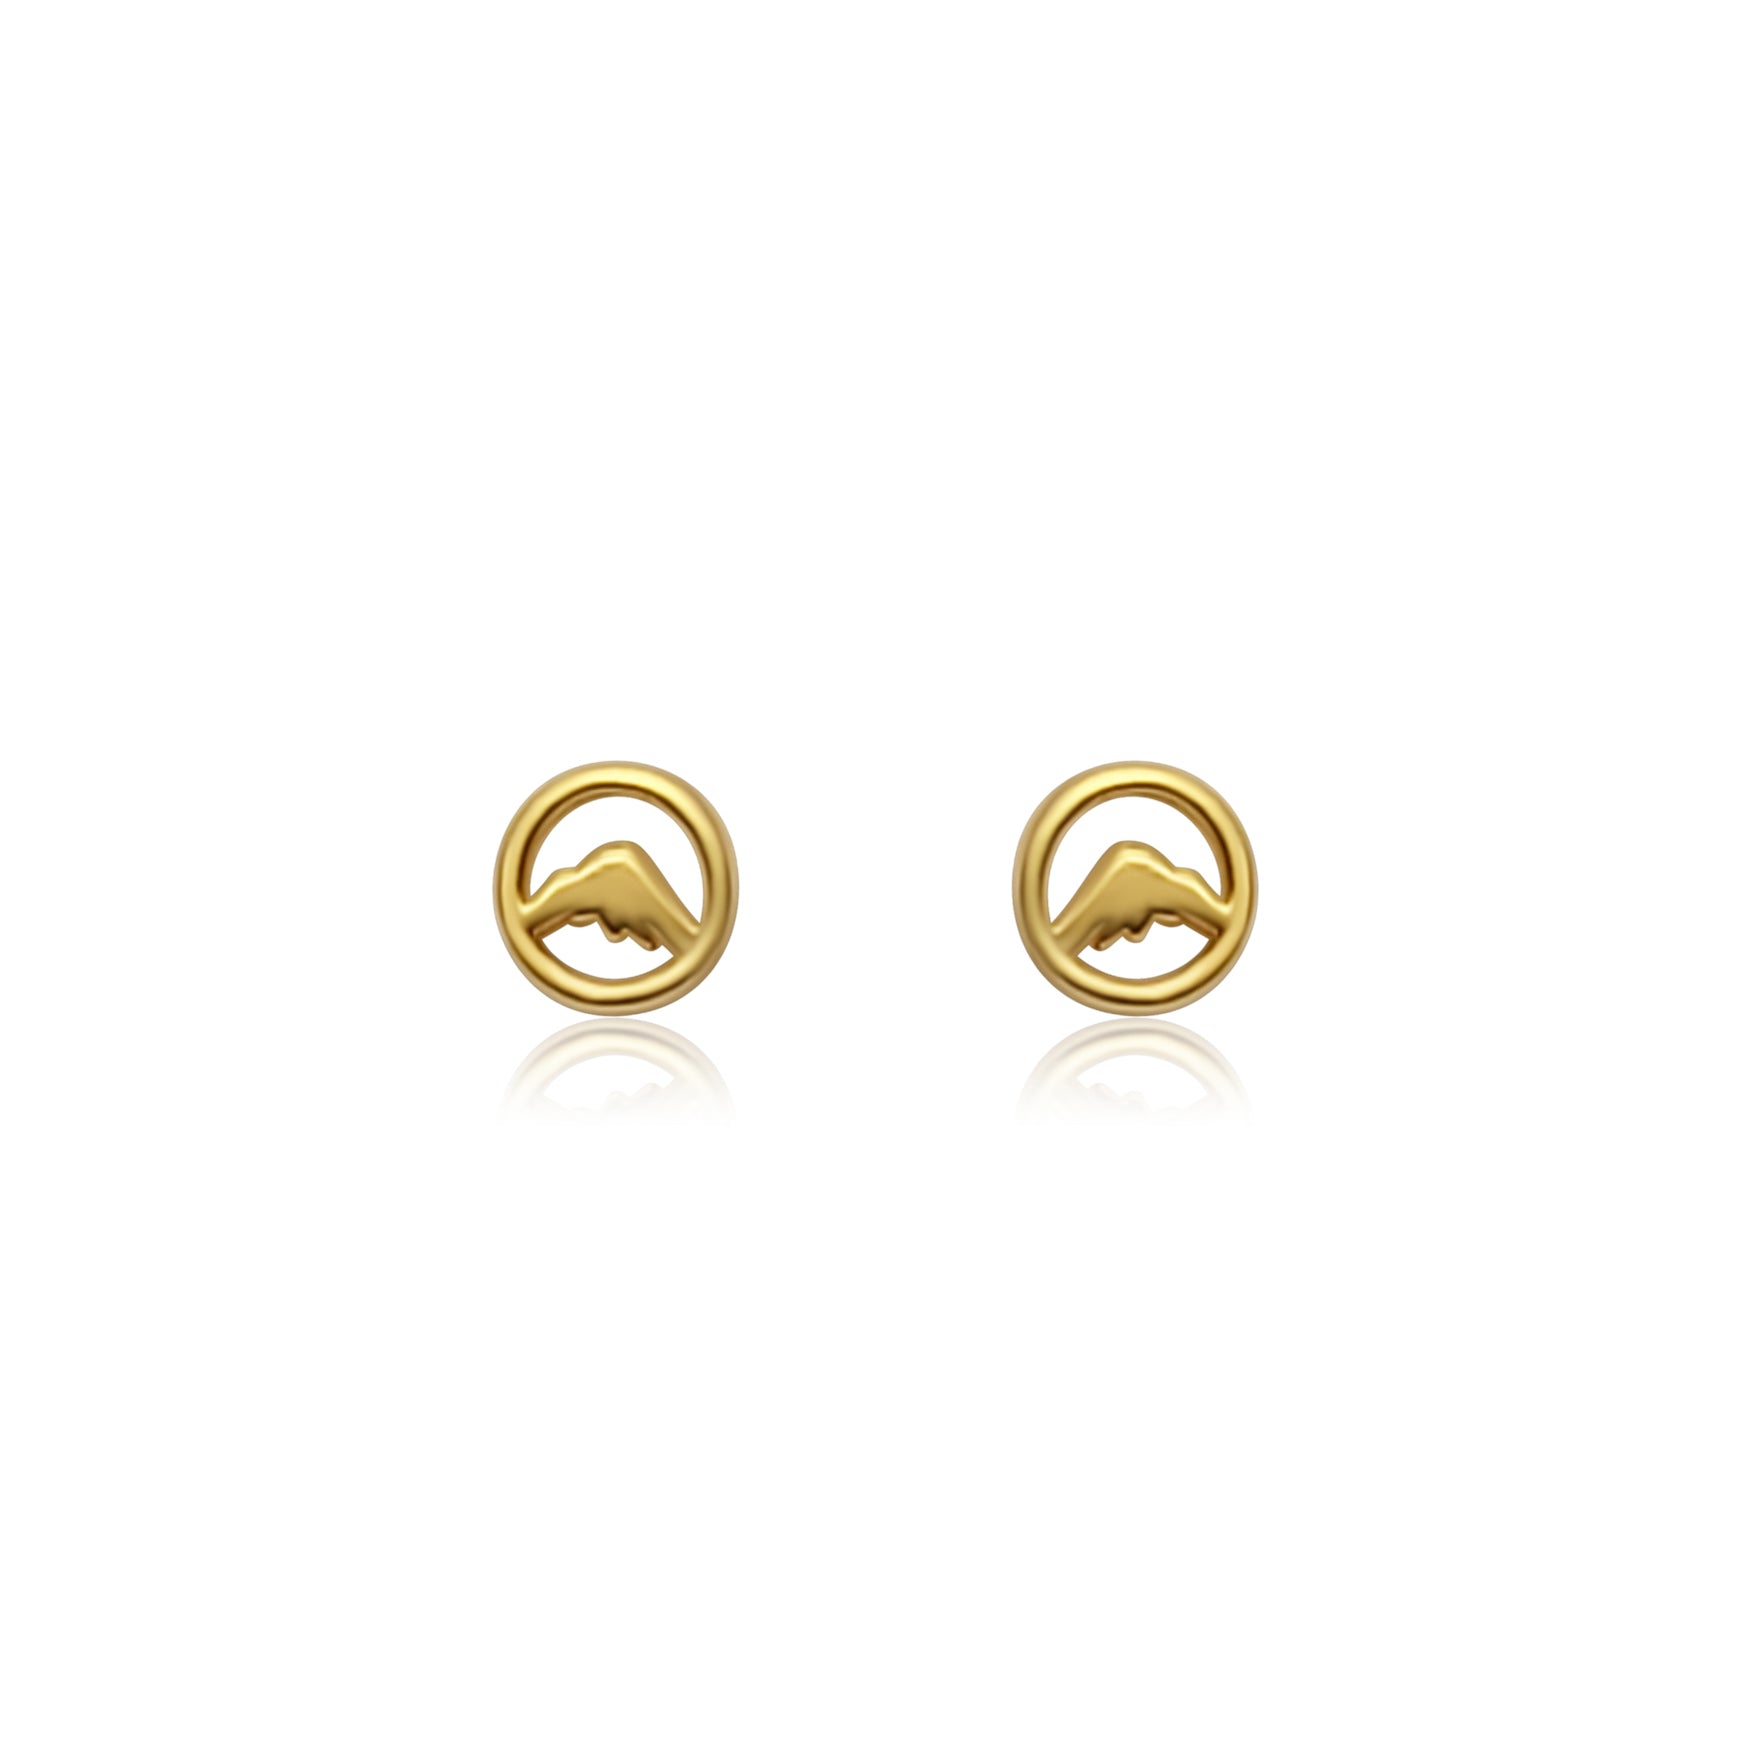 gold plated sterling silver  Beaumont stud earrings with small circle mountain charm